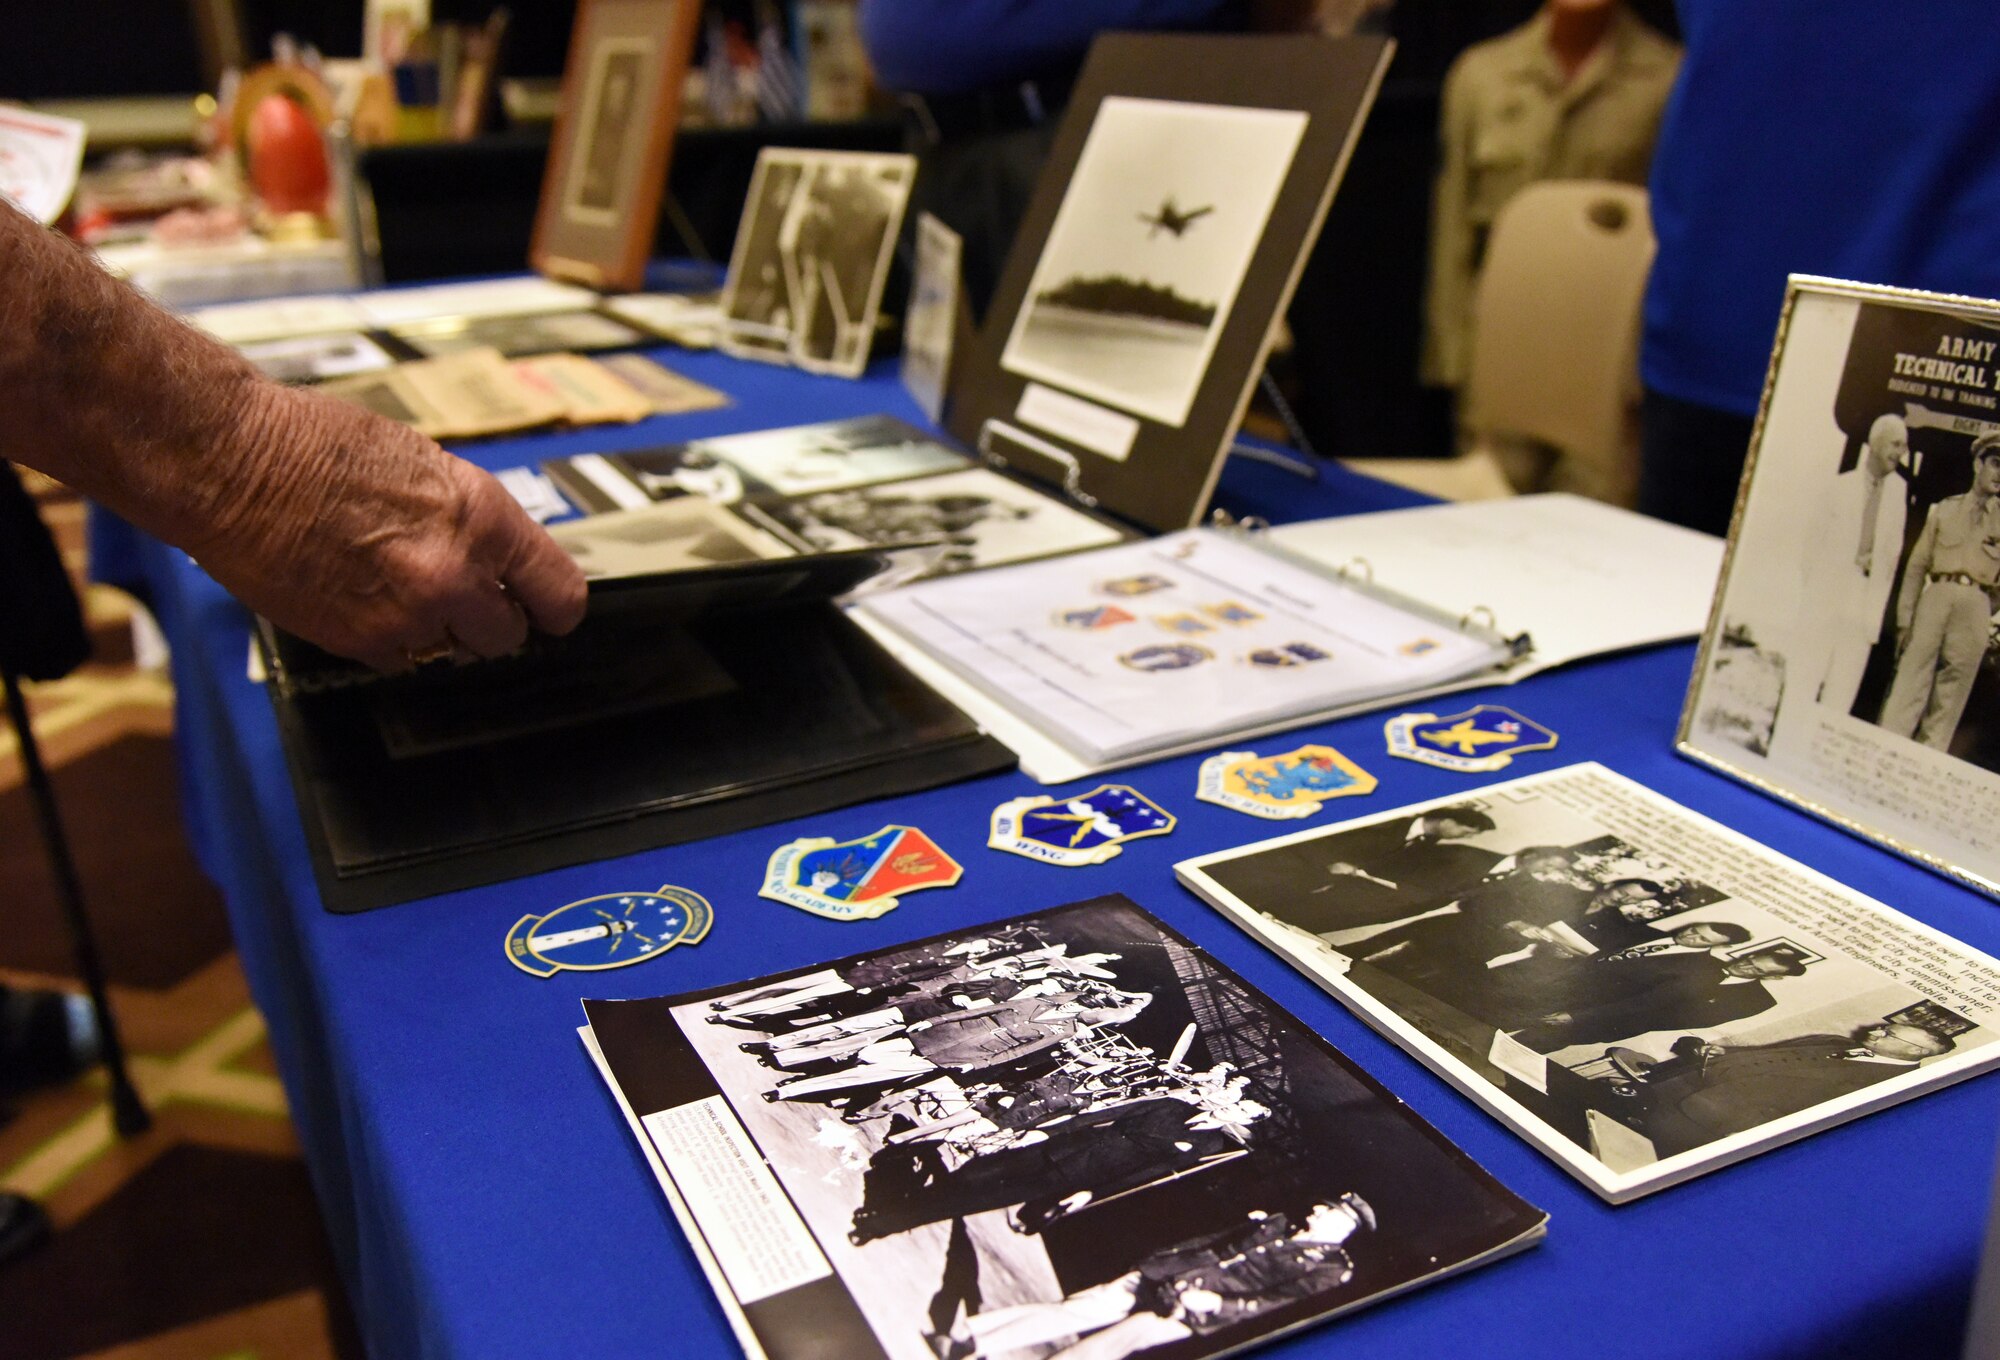 Pat Byrd, Biloxi resident, views Keesler Air Force Base memorabilia during the Gulf Coast Historical and Cultural Exposition at the Biloxi Civic Center Feb. 23, 2018, in Biloxi, Mississippi. The event, which consisted of historical and cultural groups displaying the rich and diverse history and culture of the Mississippi Gulf Coast, also showcased both Keesler AFB and Air Force history. (U.S. Air Force photo by Kemberly Groue)